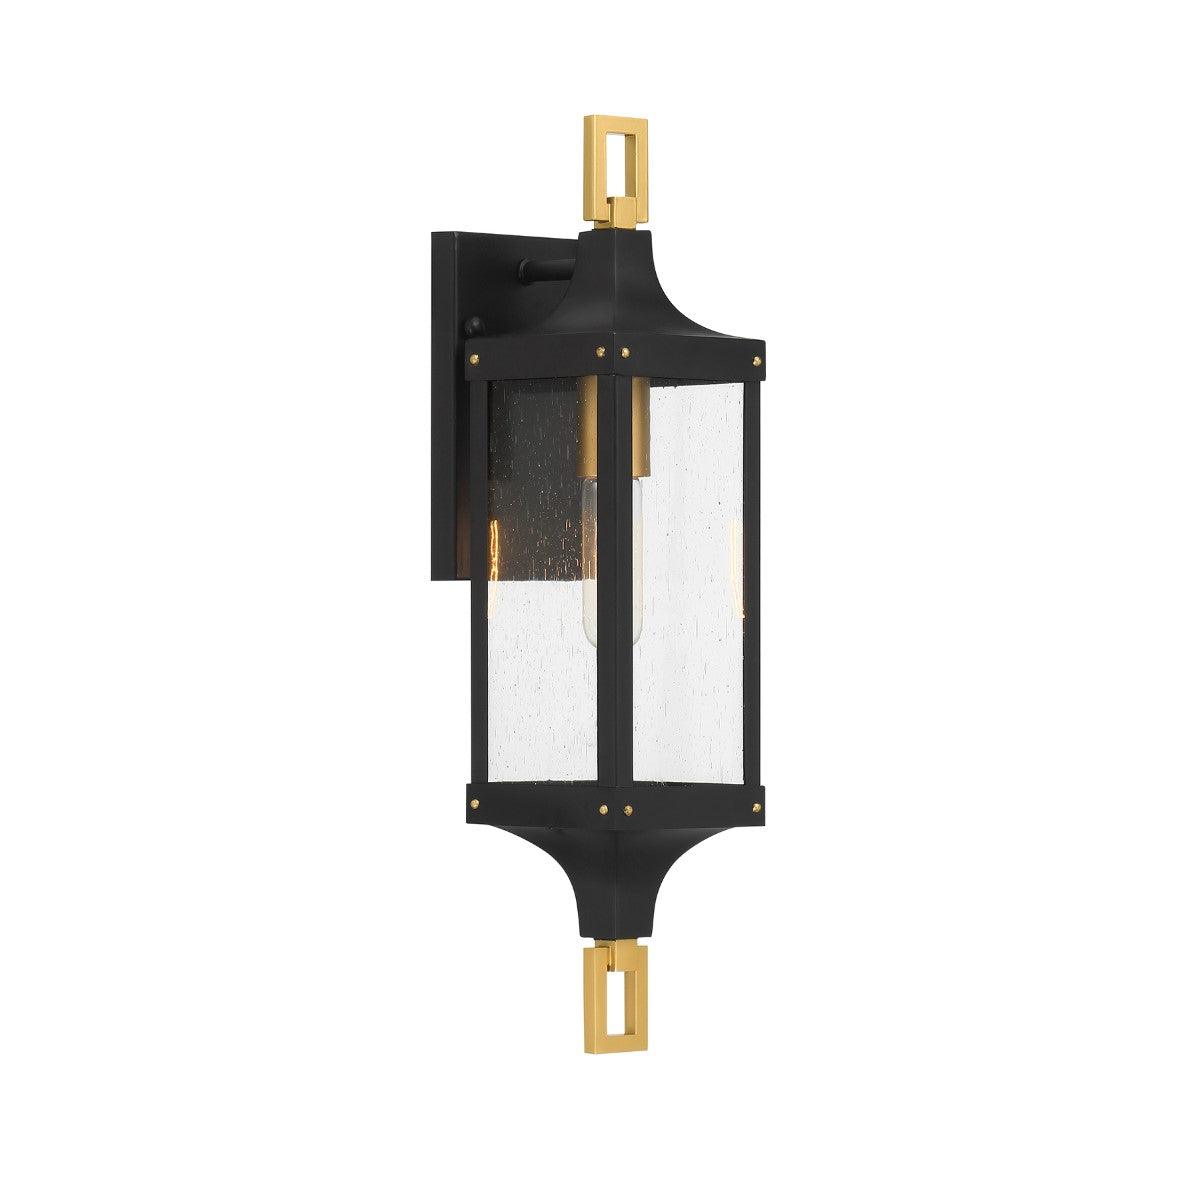 Glendale 21 in. Outdoor Wall Lantern Matte Black and Weathered Brushed Brass Finish